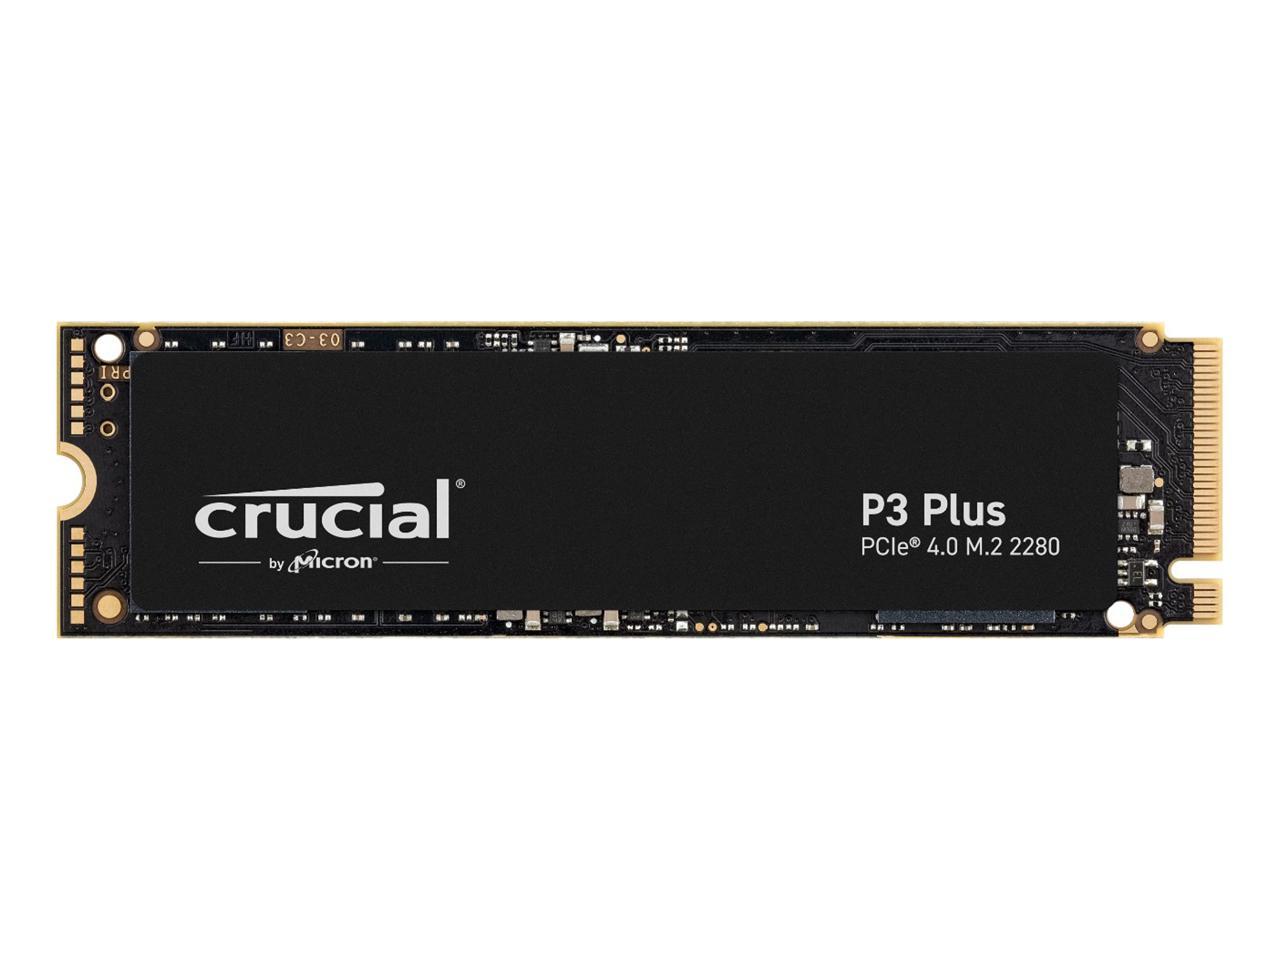 Crucial P3 Plus 2TB PCIe 4.0 3D NAND NVMe M.2 SSD, up to 5000MB/s - CT2000P3PSSD8 for $101 $101.69